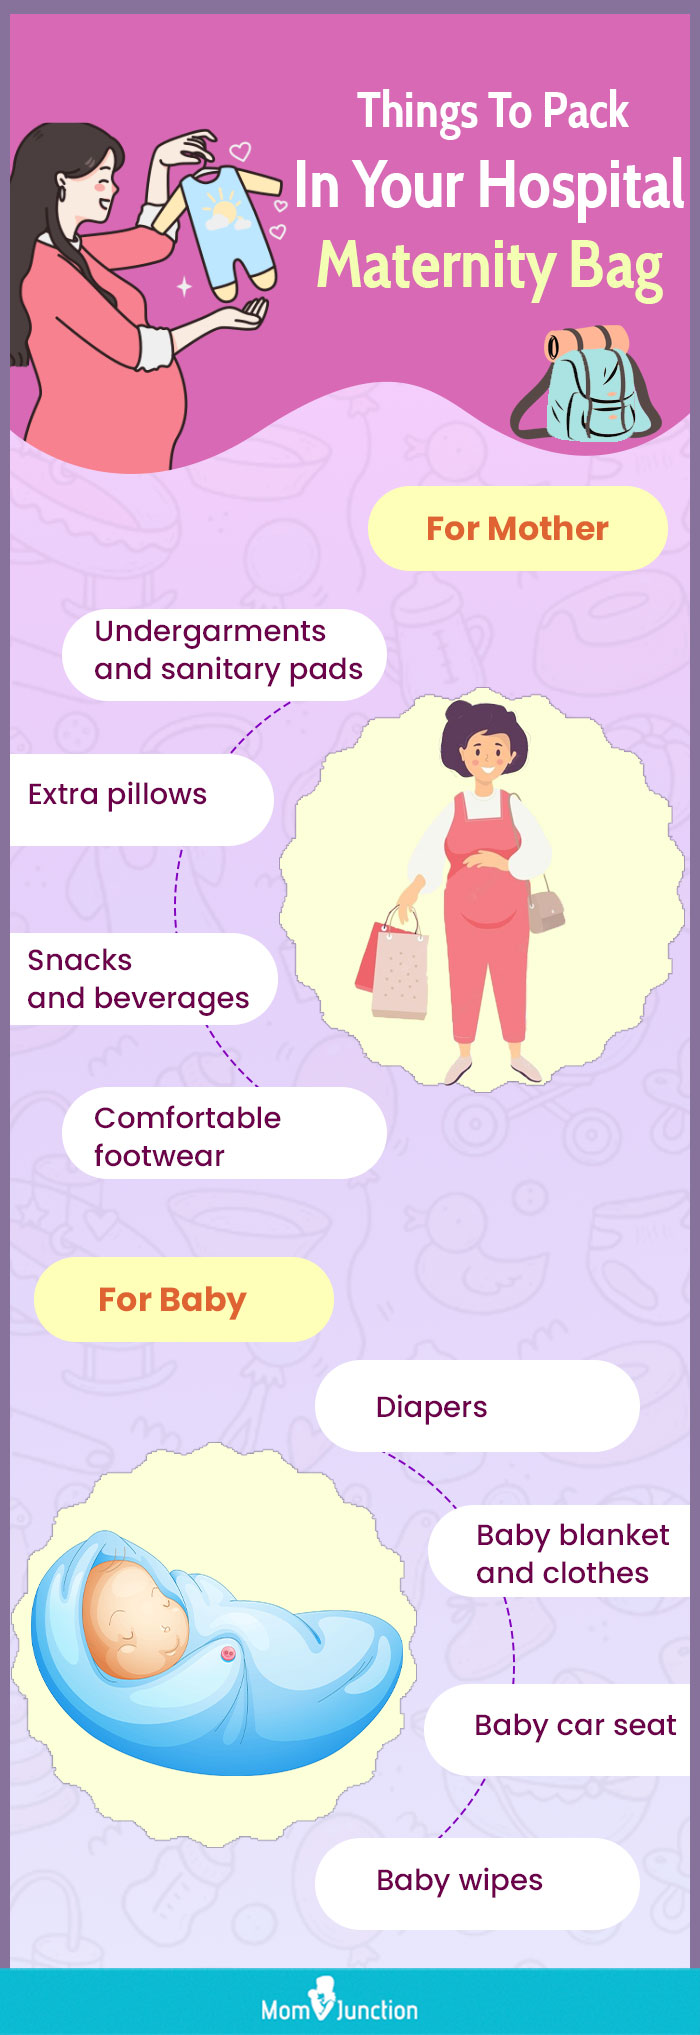 things to pack in your hospital maternity bag (infographic)